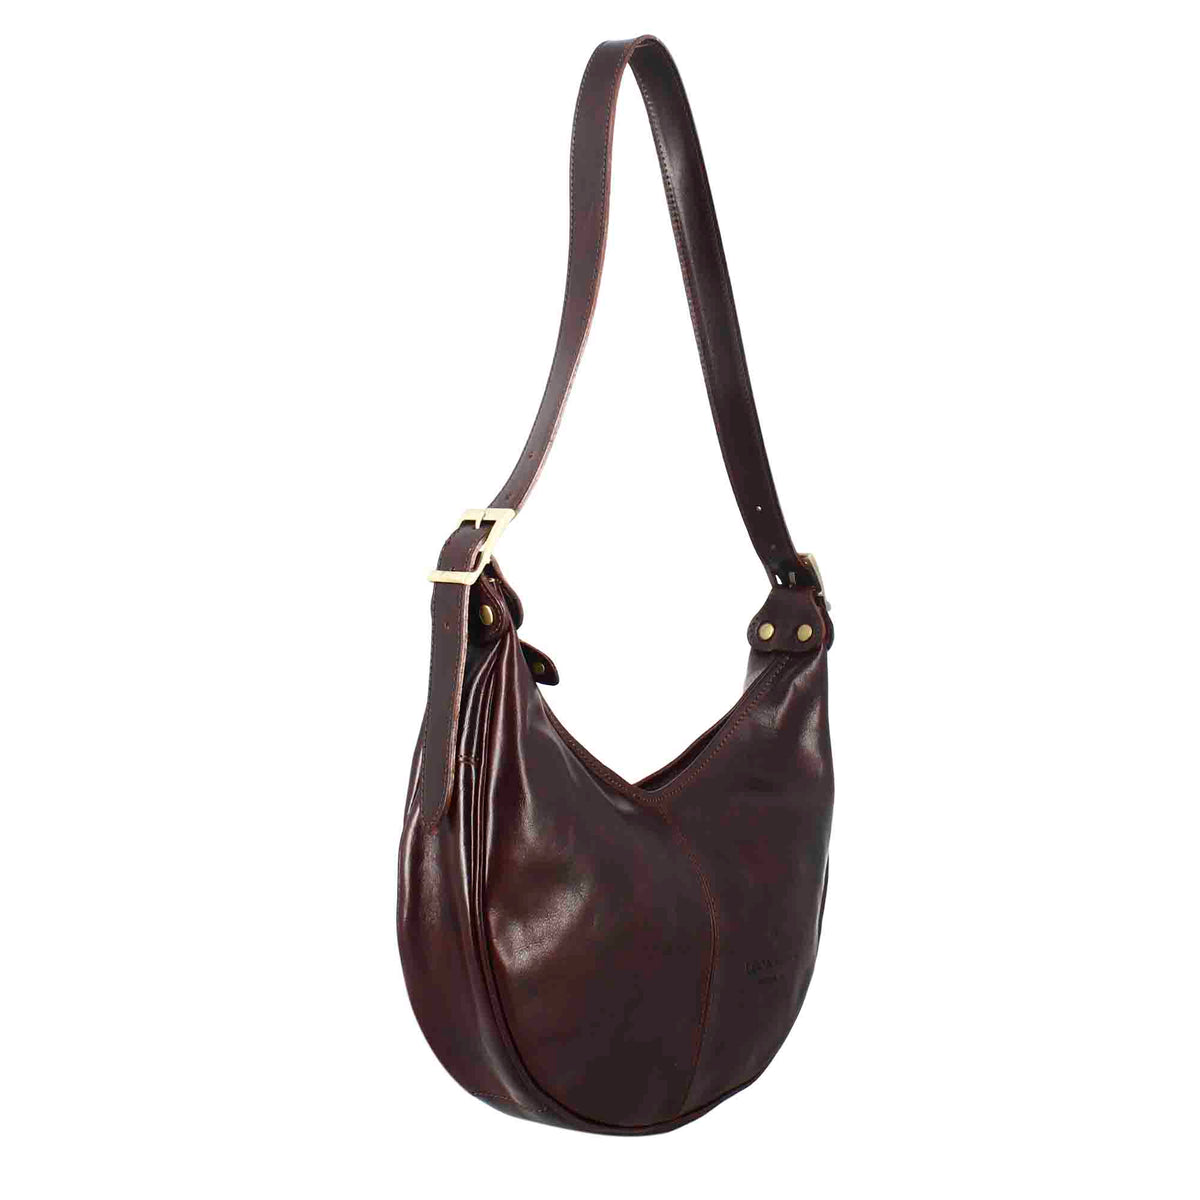 Classic women's City shopper bag in dark brown smooth leather